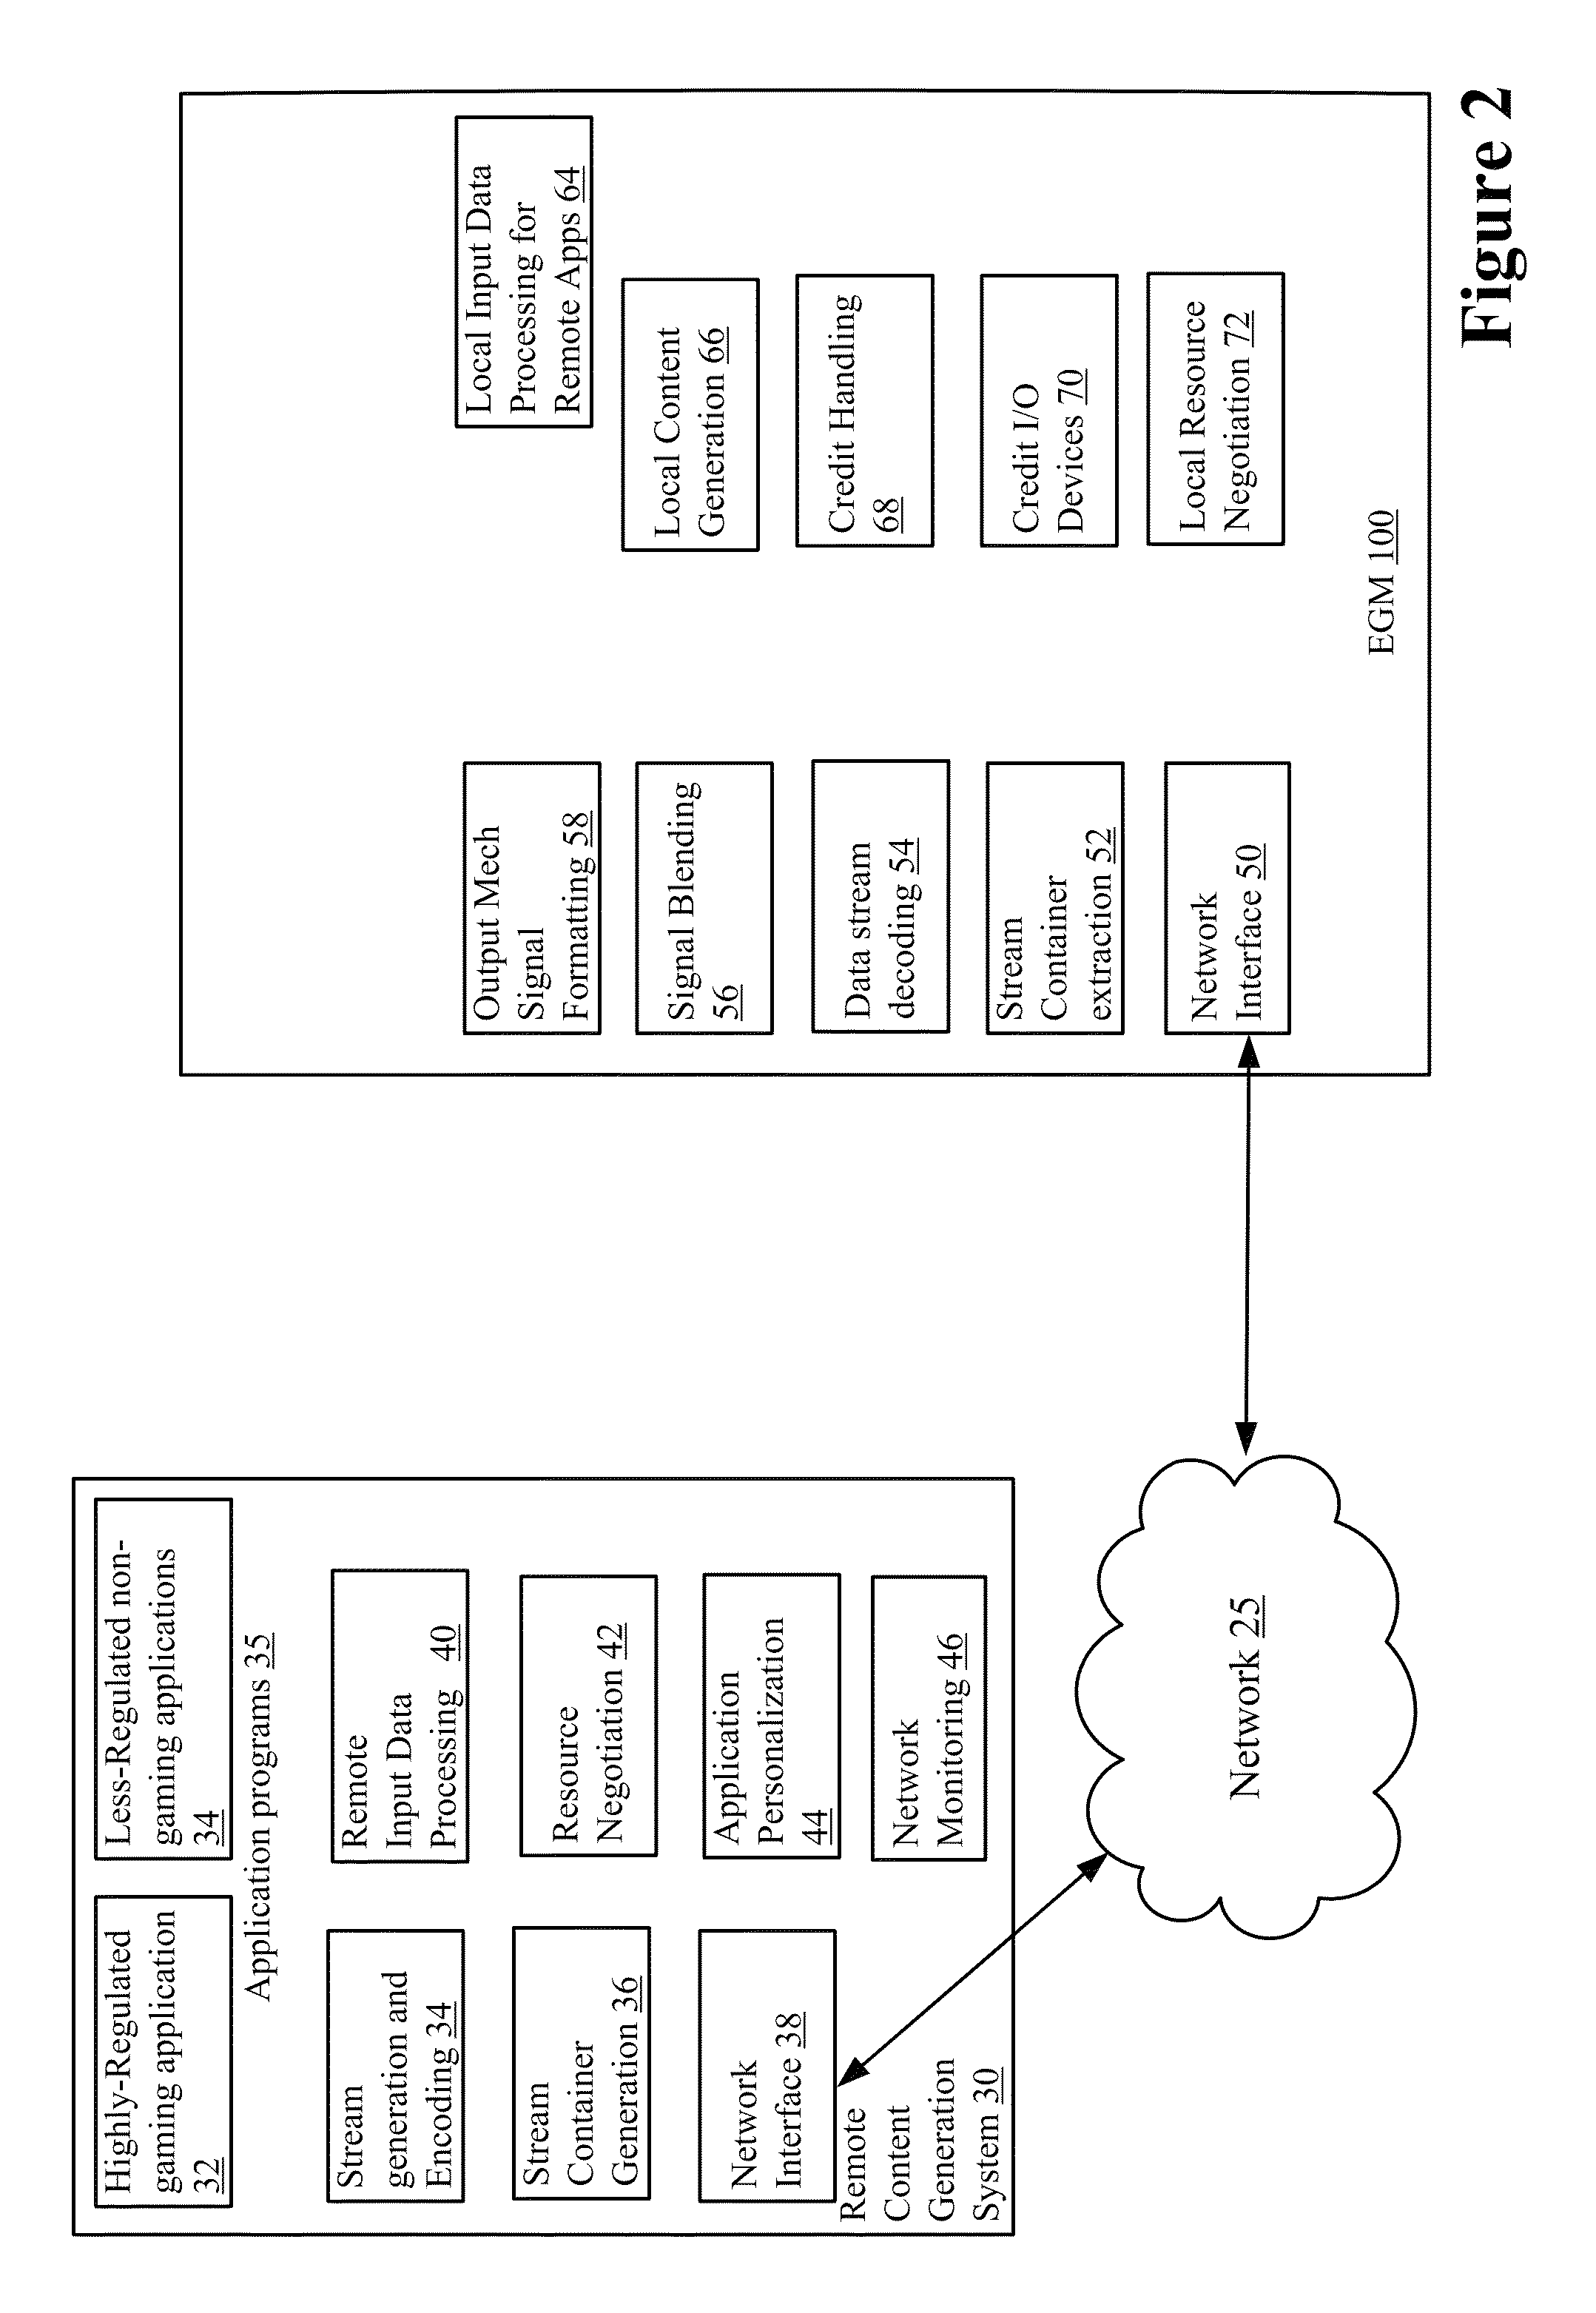 System and method for remote rendering of content on an electronic gaming machine